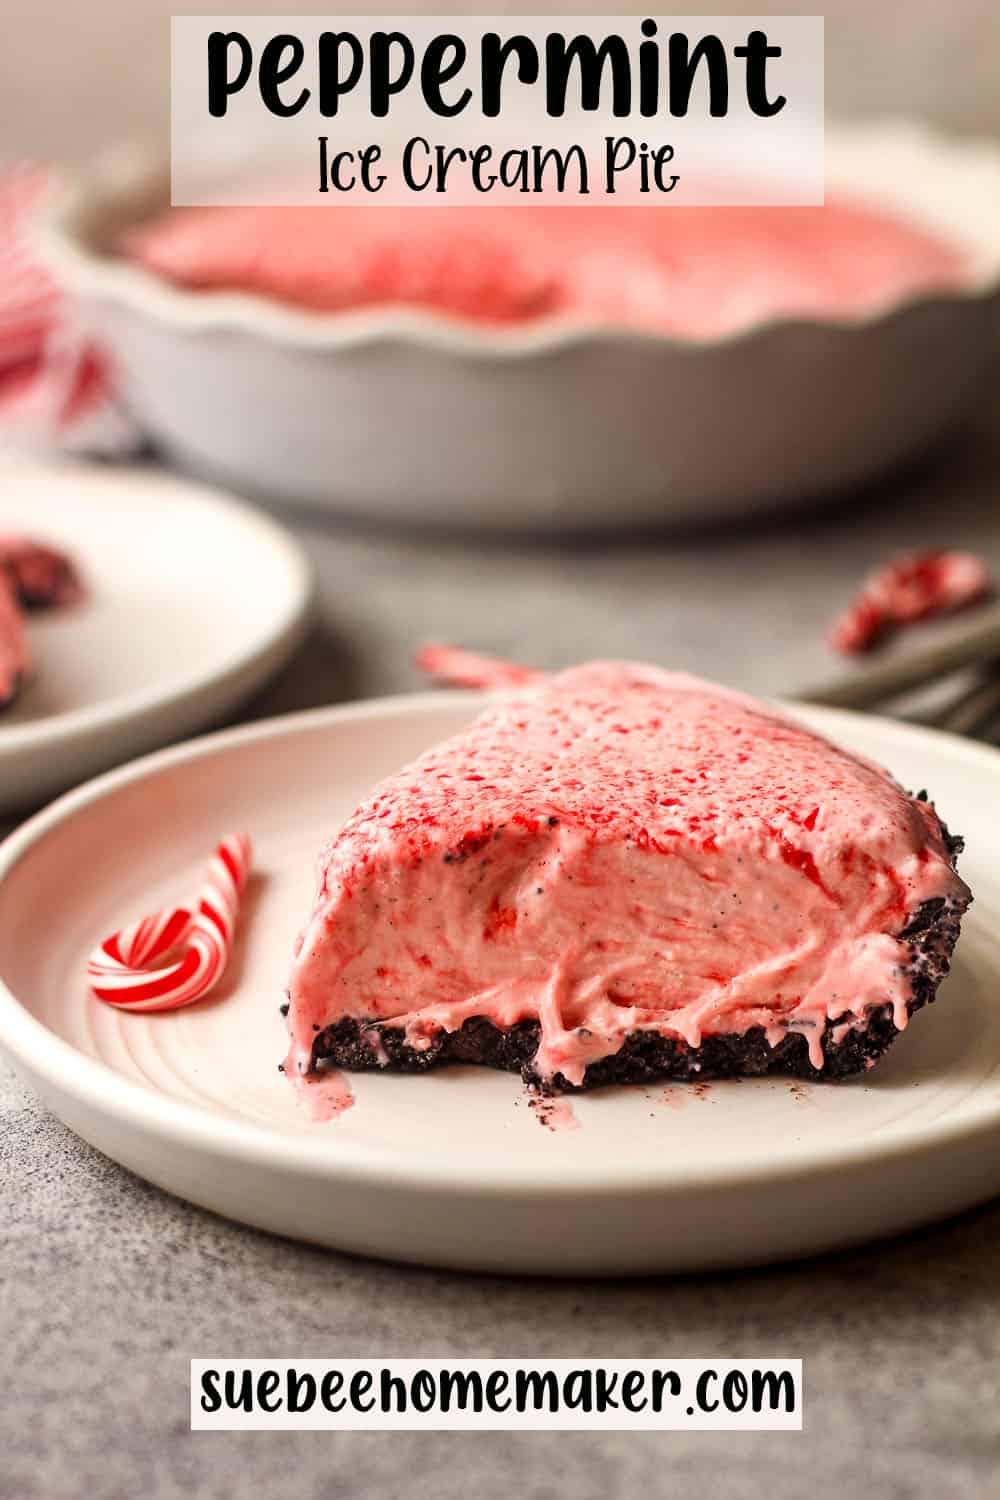 Side view of a slice of peppermint ice cream pie.